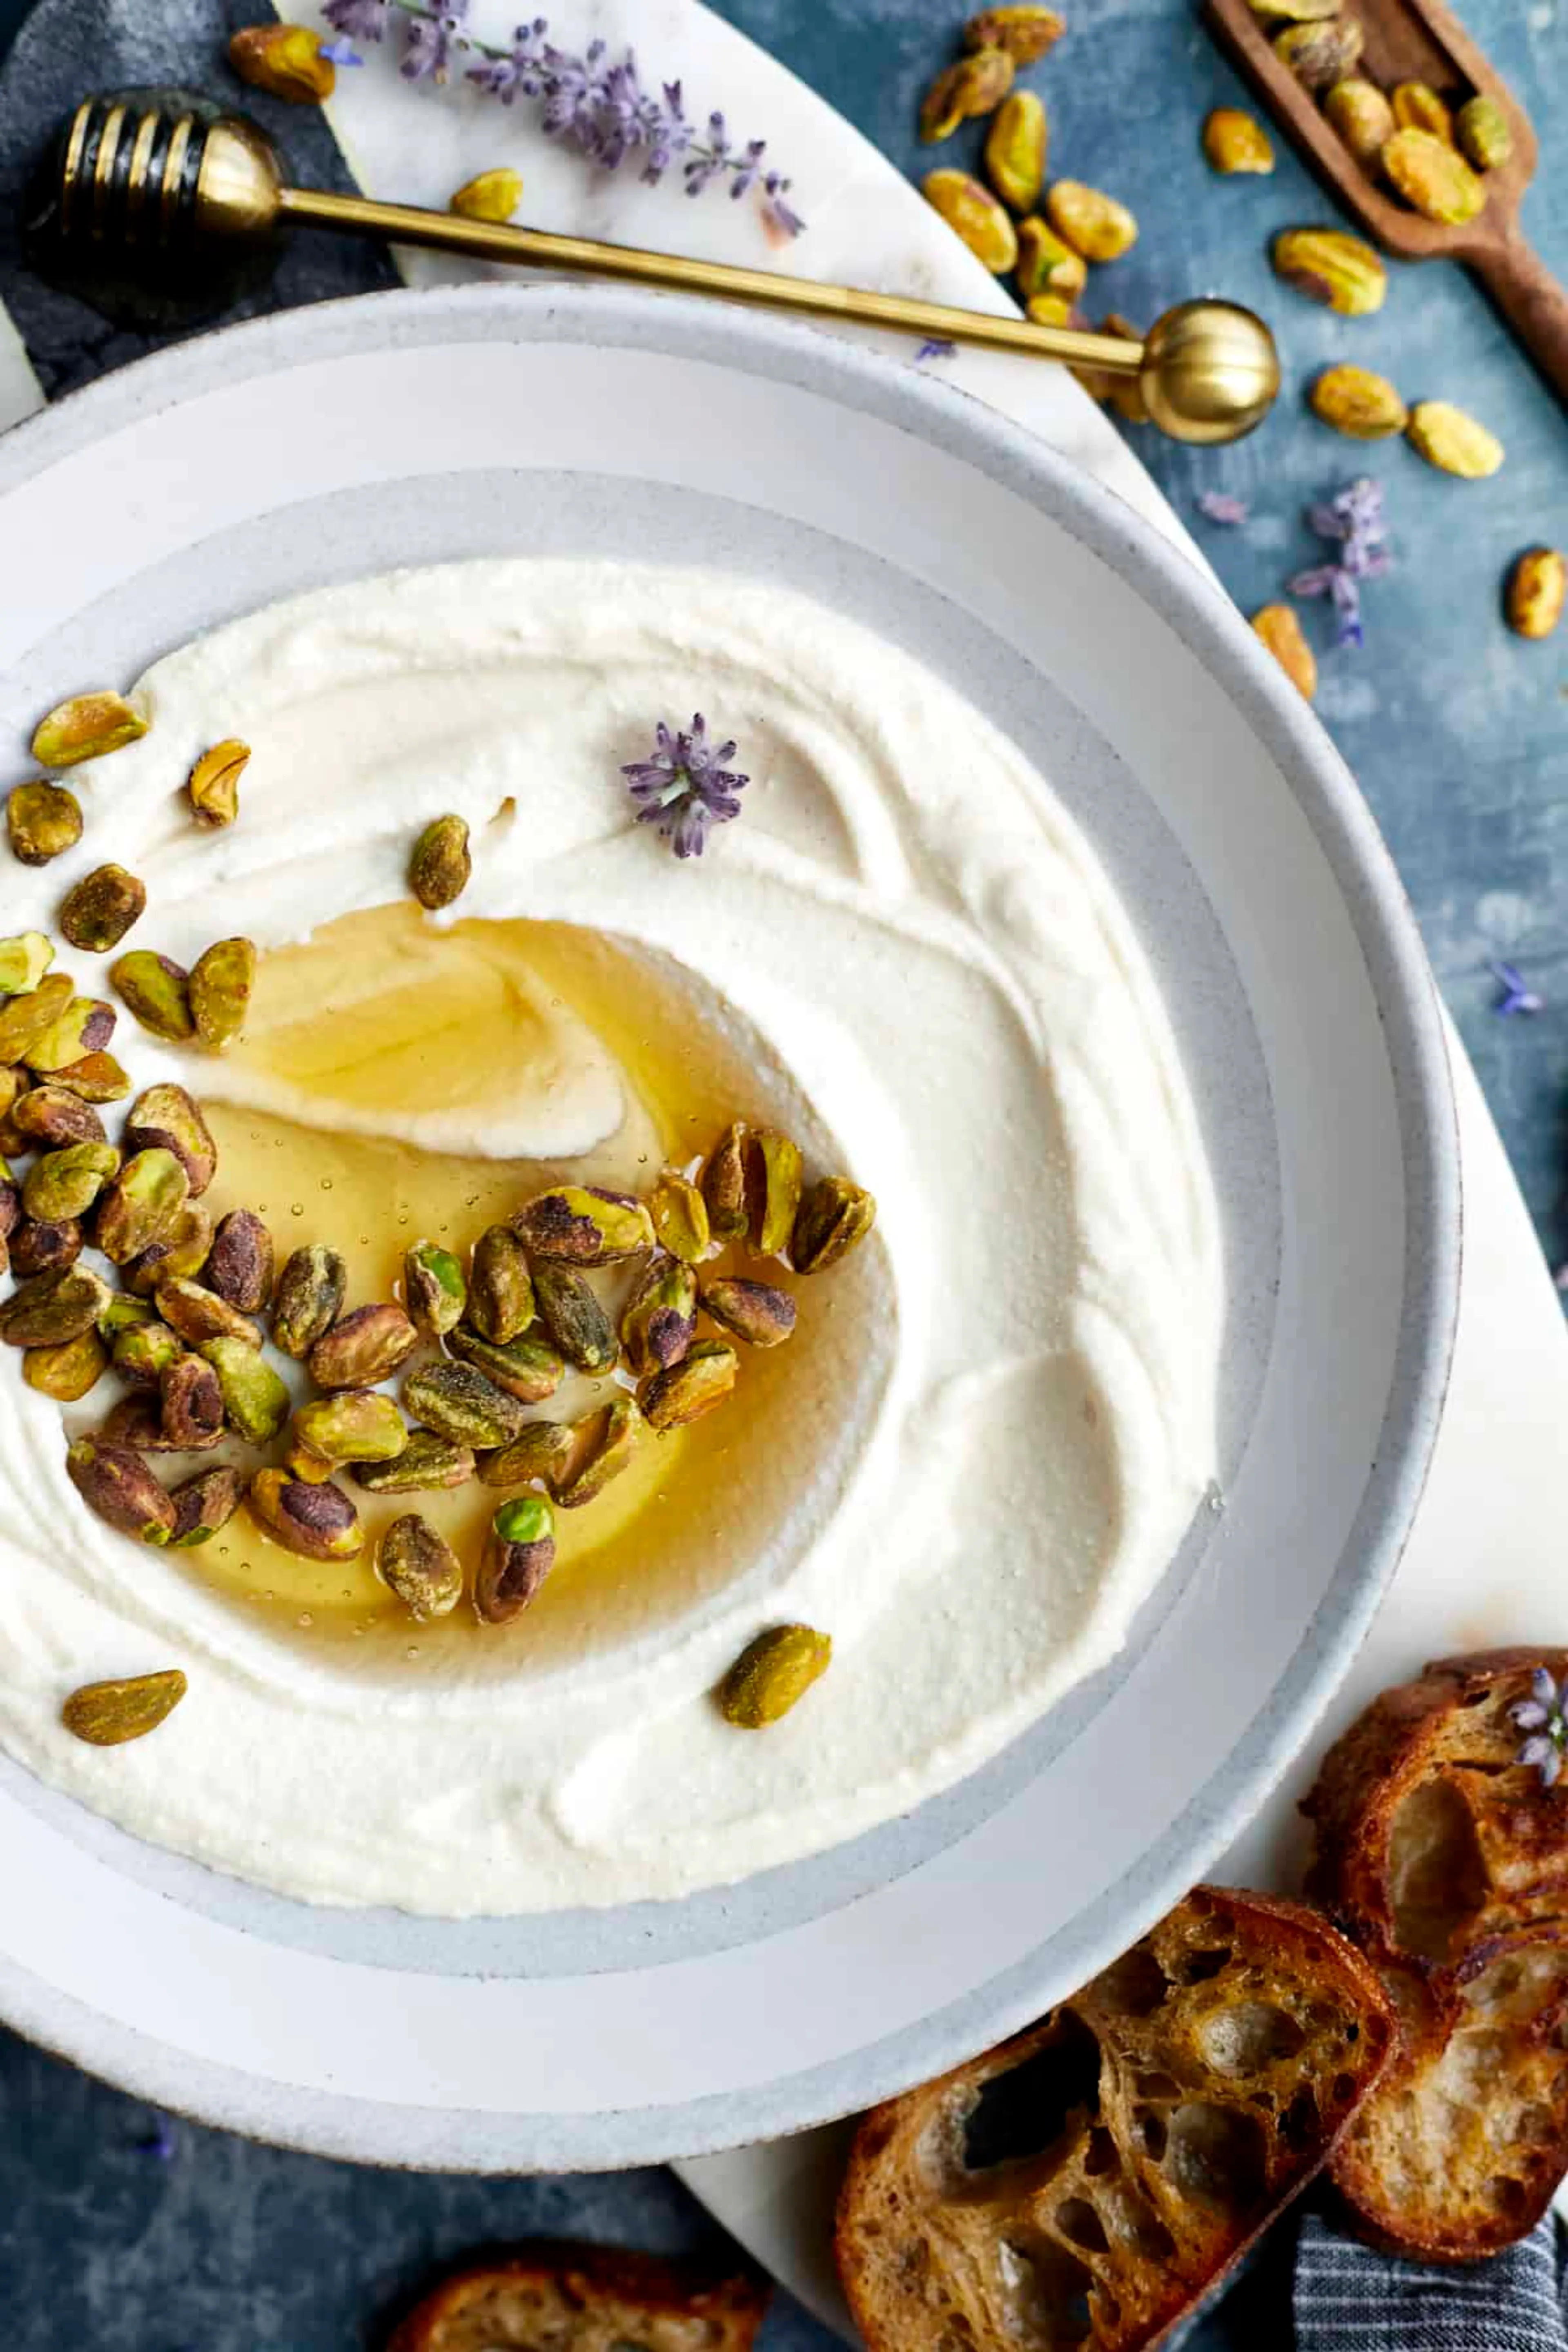 Whipped Ricotta Dip with Honey and Pistachios